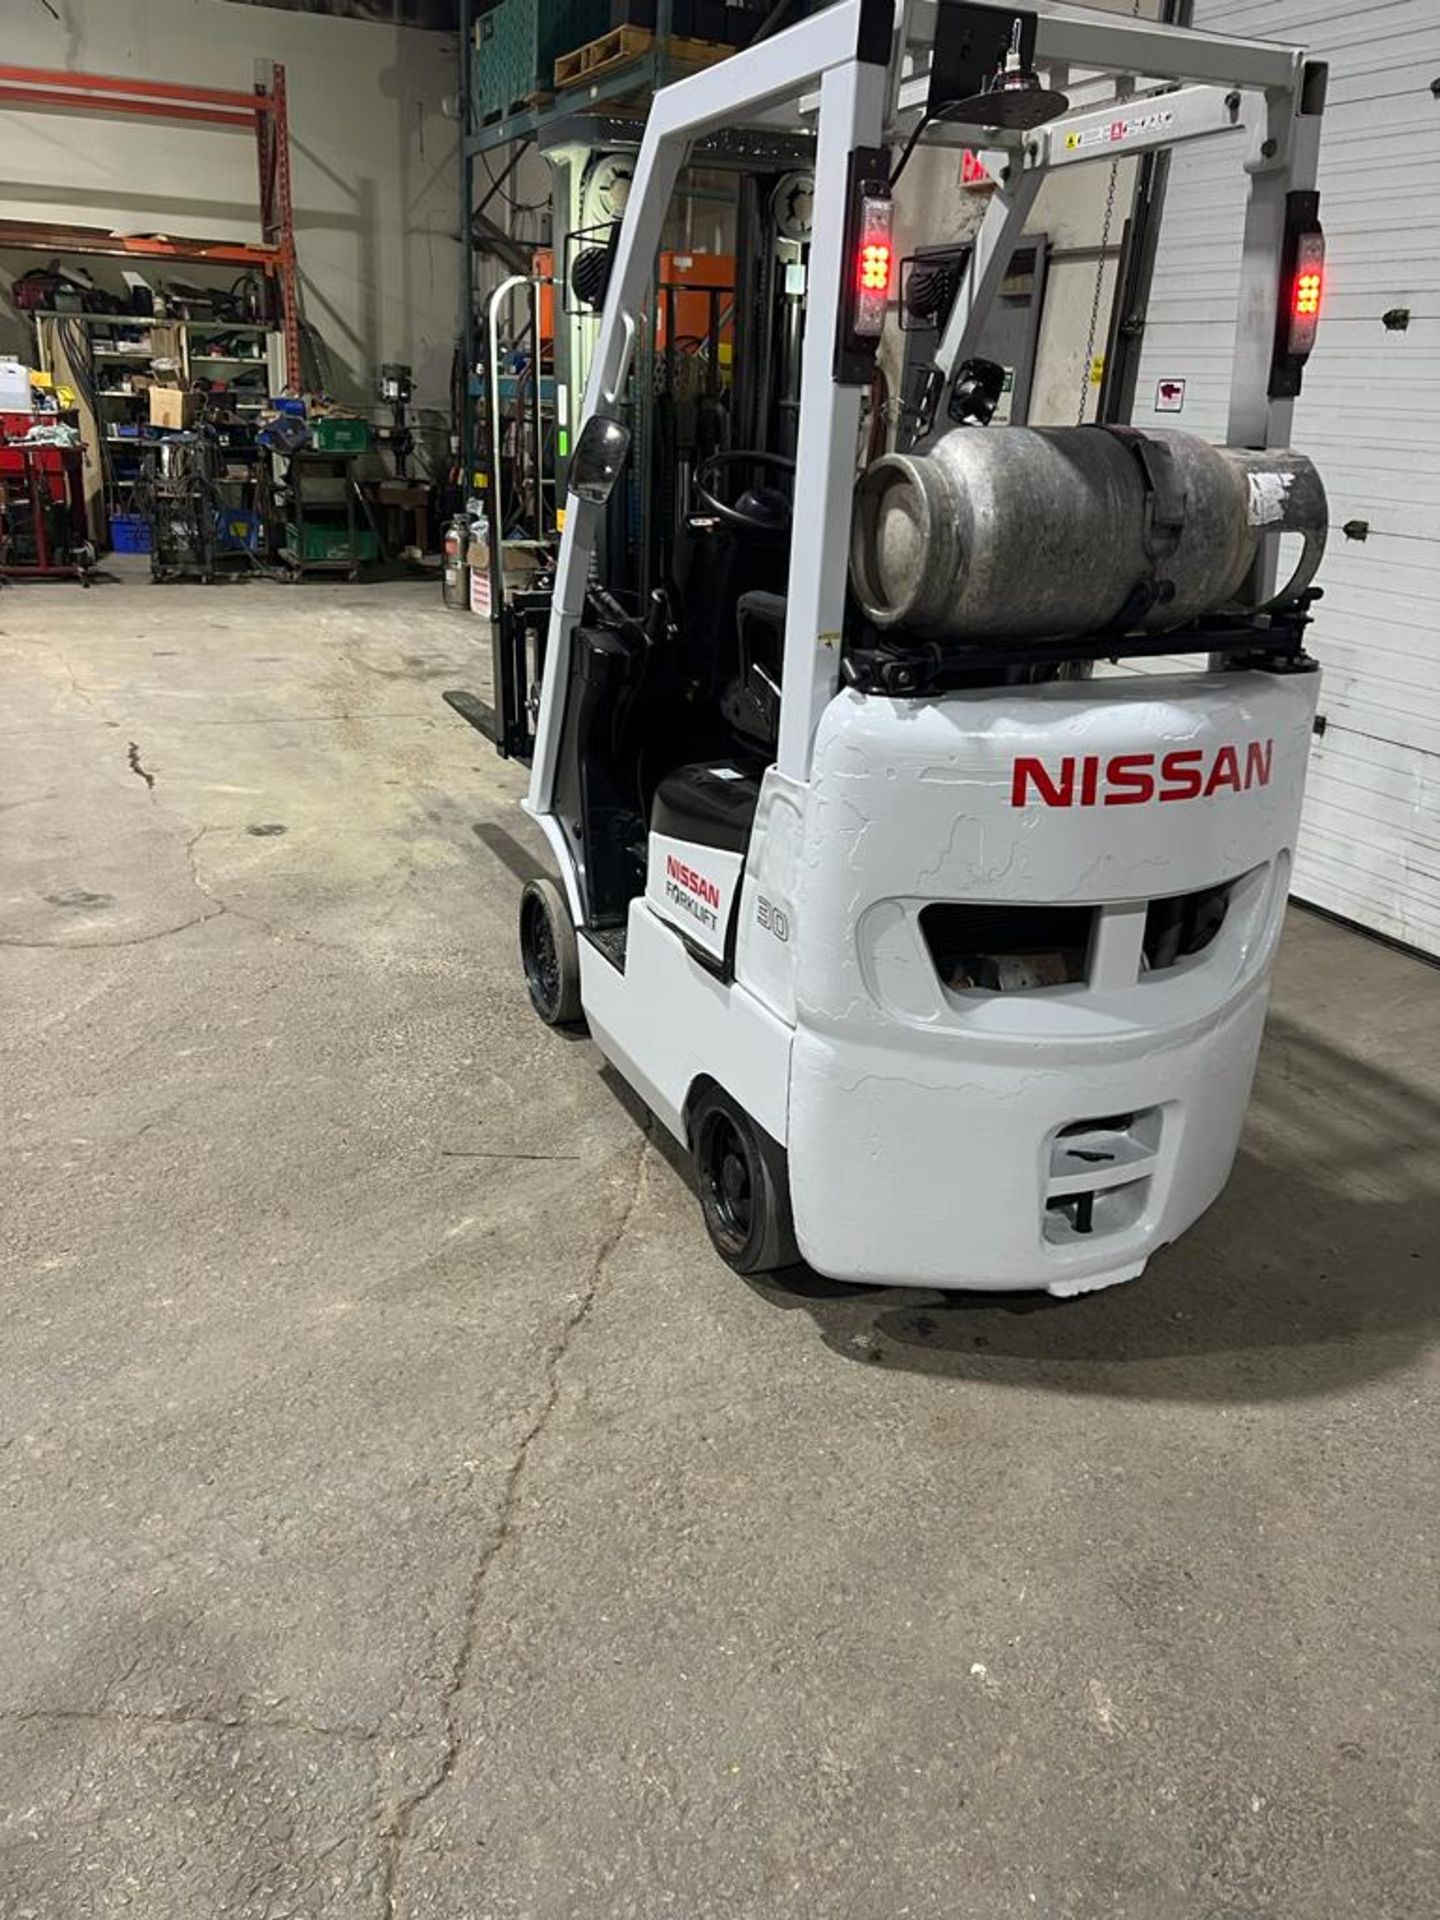 Nissan 3,000lbs Capacity Forklift with Sideshift LPG (propane) with 3-stage mast with LOW HOURS - - Image 3 of 5